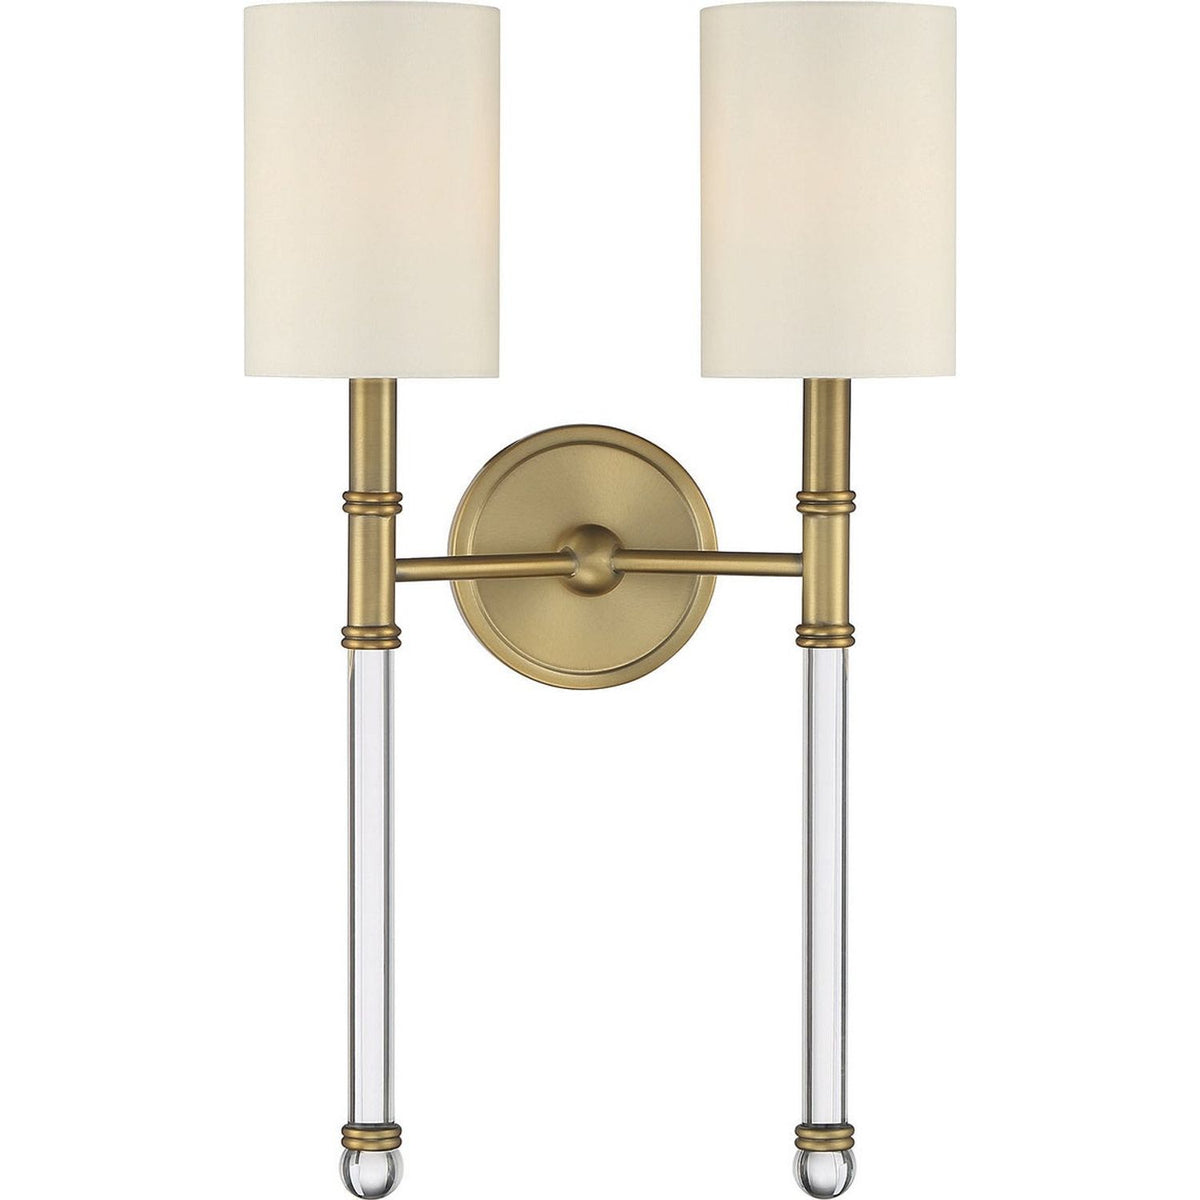 Savoy House - 9-103-2-322 - Two Light Wall Sconce - Fremont - Warm Brass